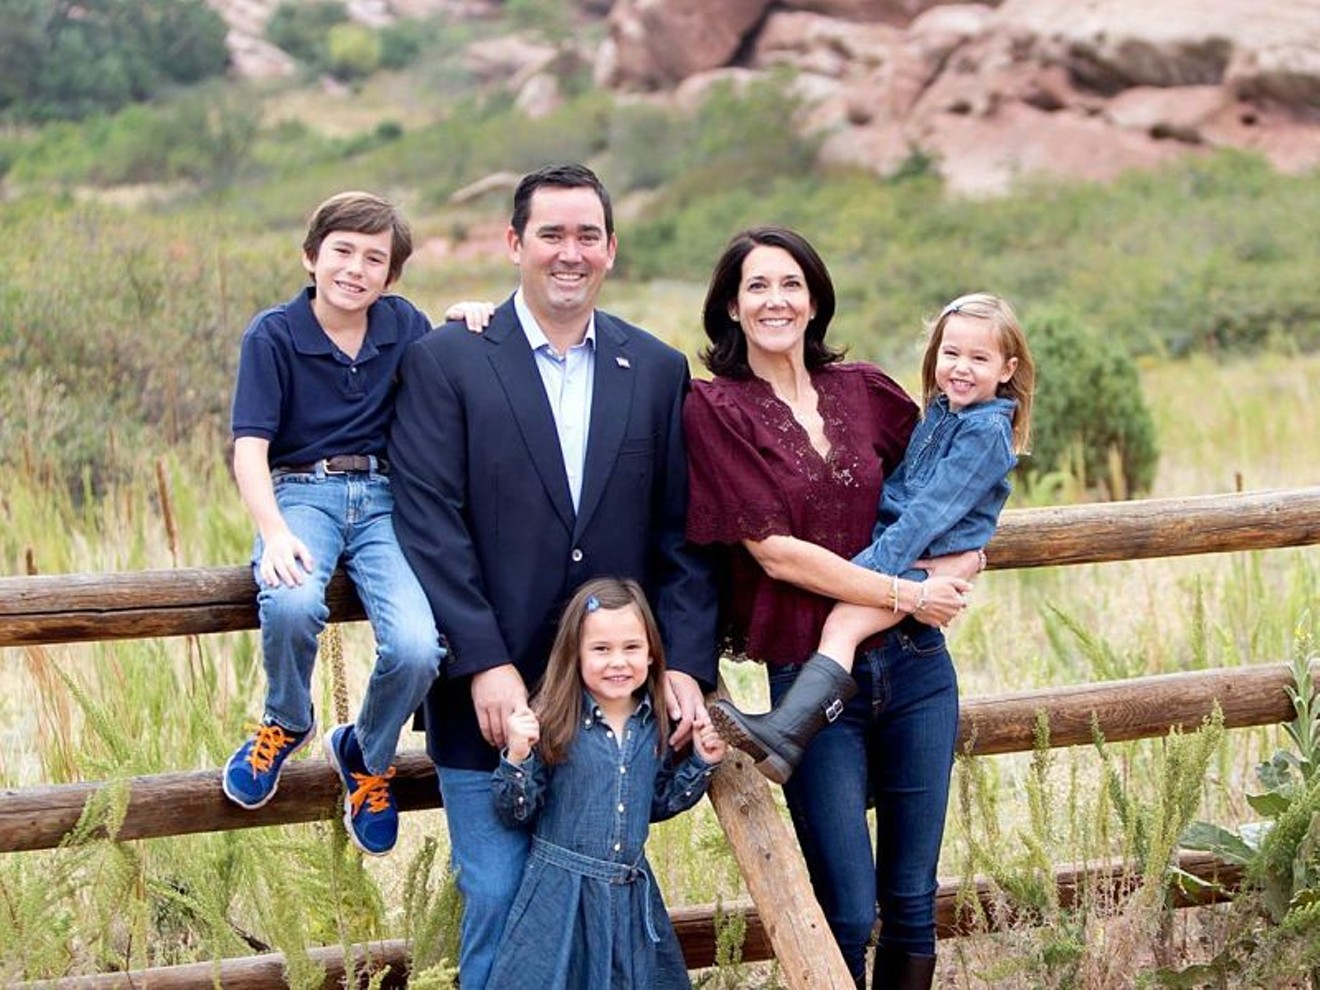 Jenna and Walker Stapleton with their children during 2018 gubernatorial campaign.